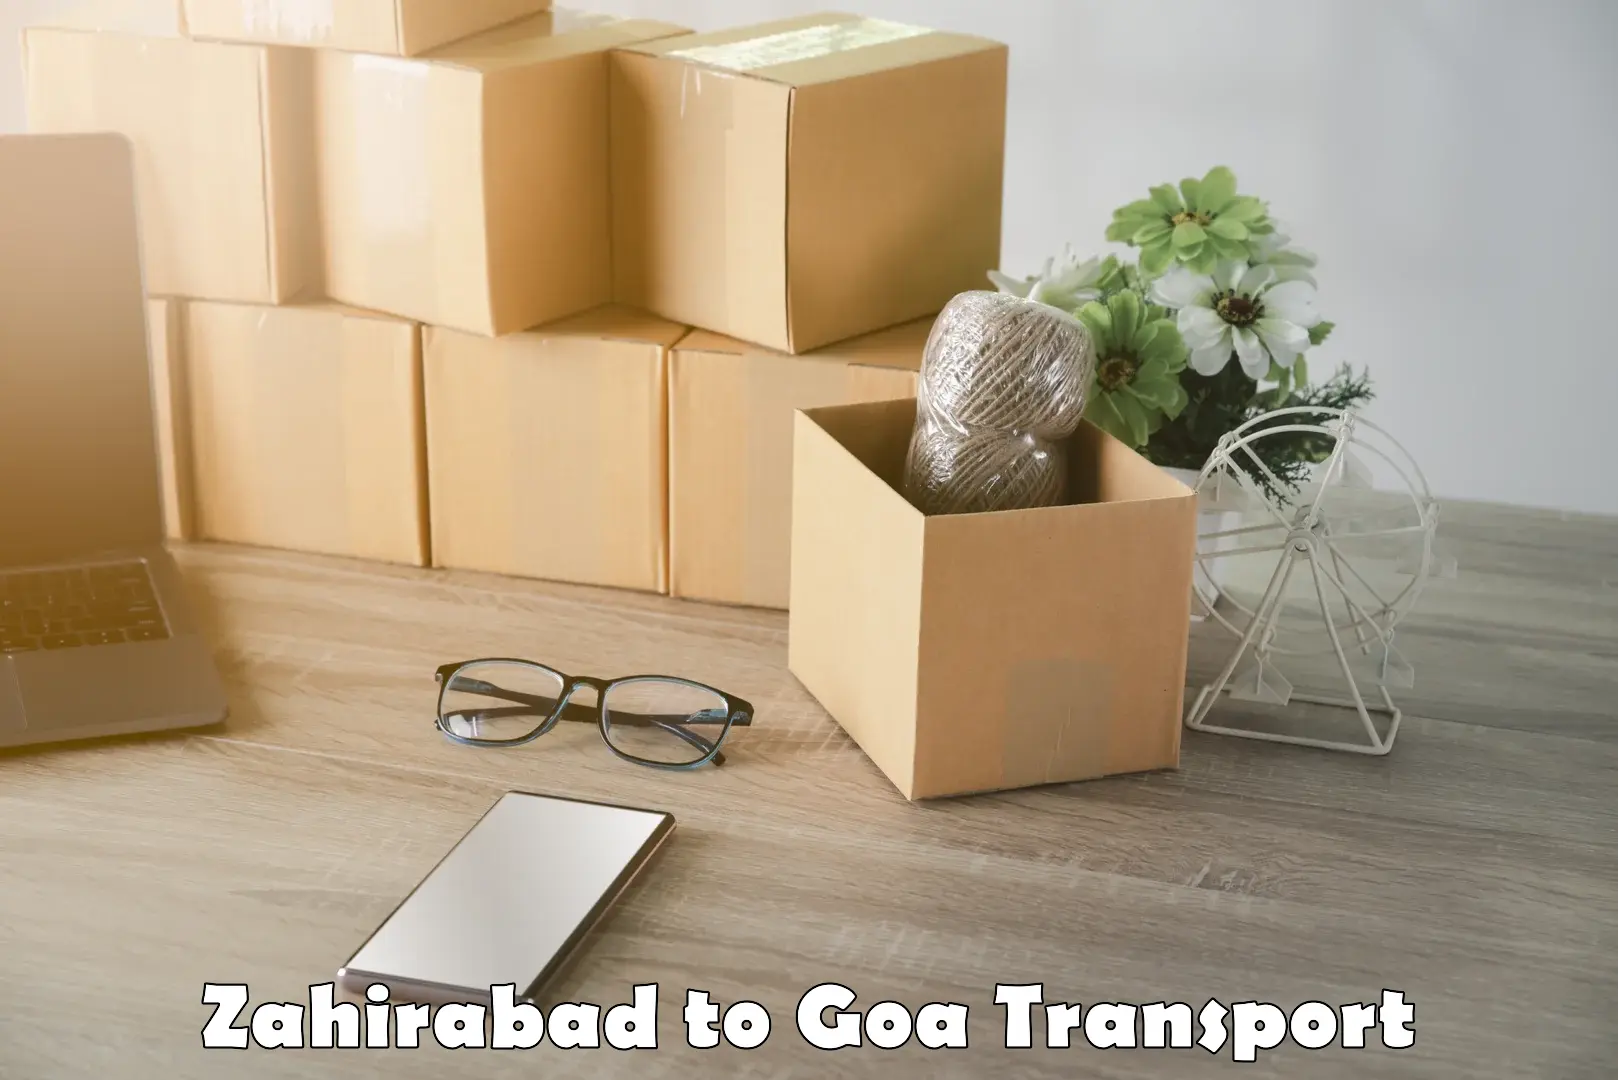 Container transport service in Zahirabad to Goa